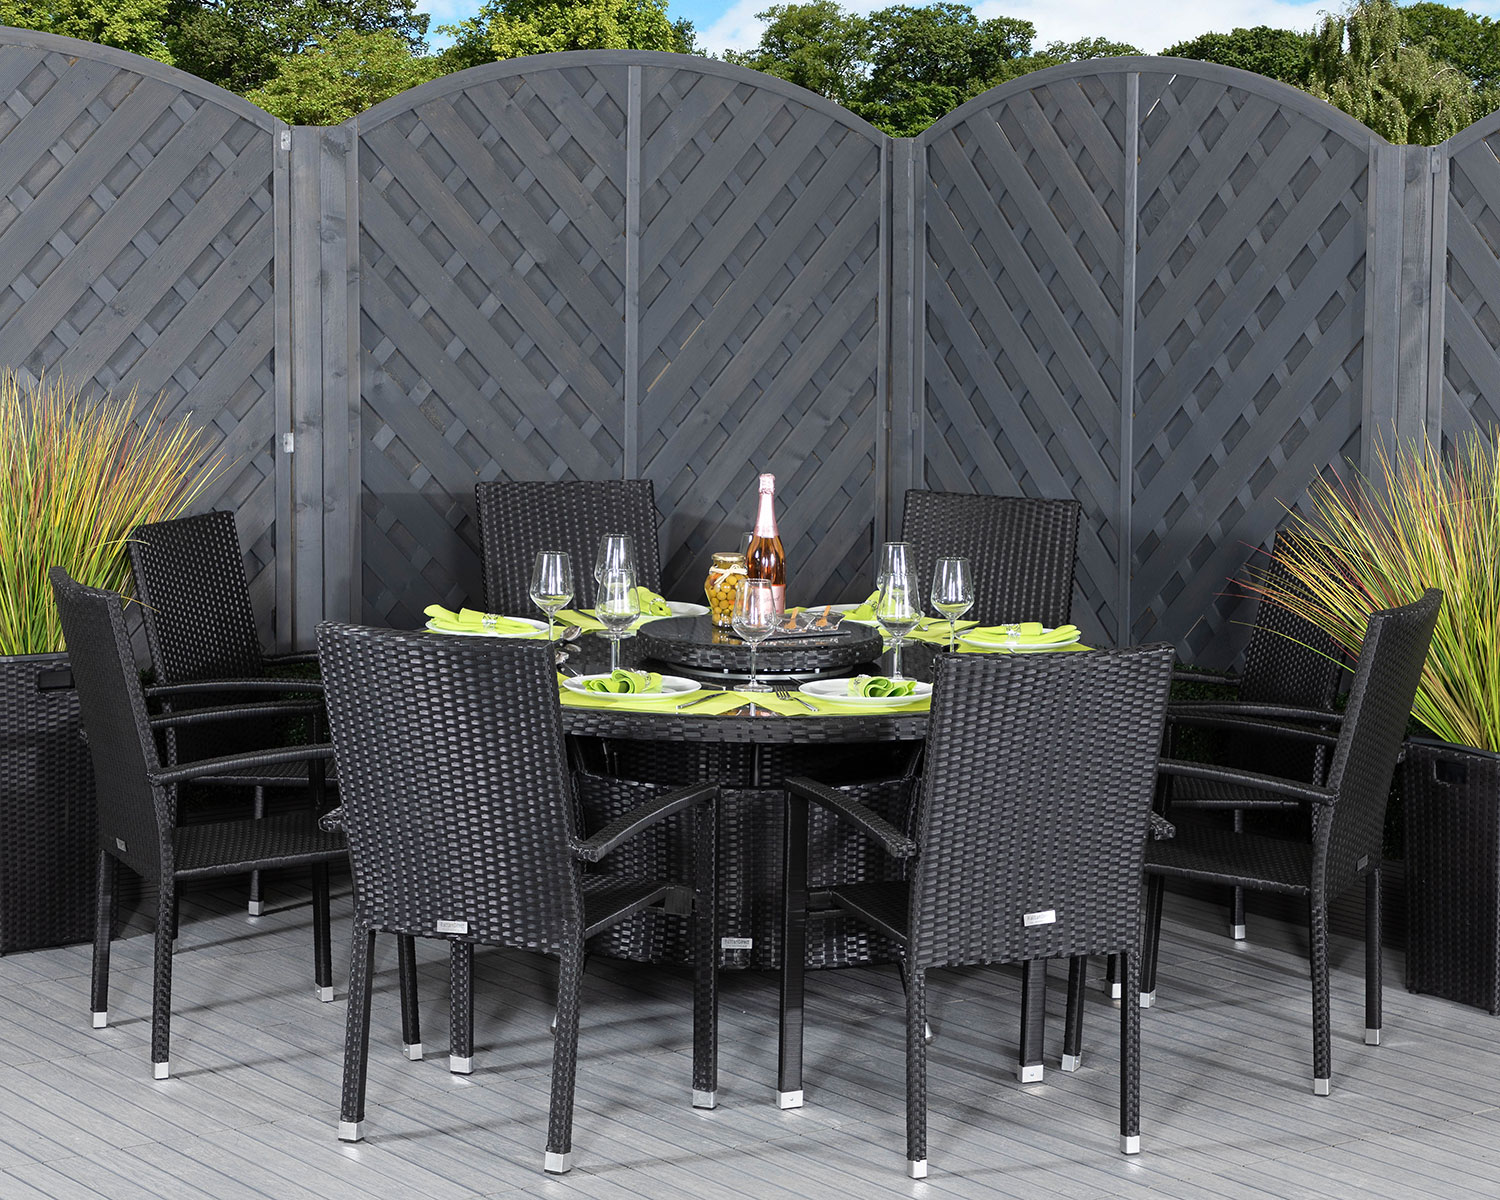 8 Seat Rattan Garden Dining Set With Large Round Dining Table in Black